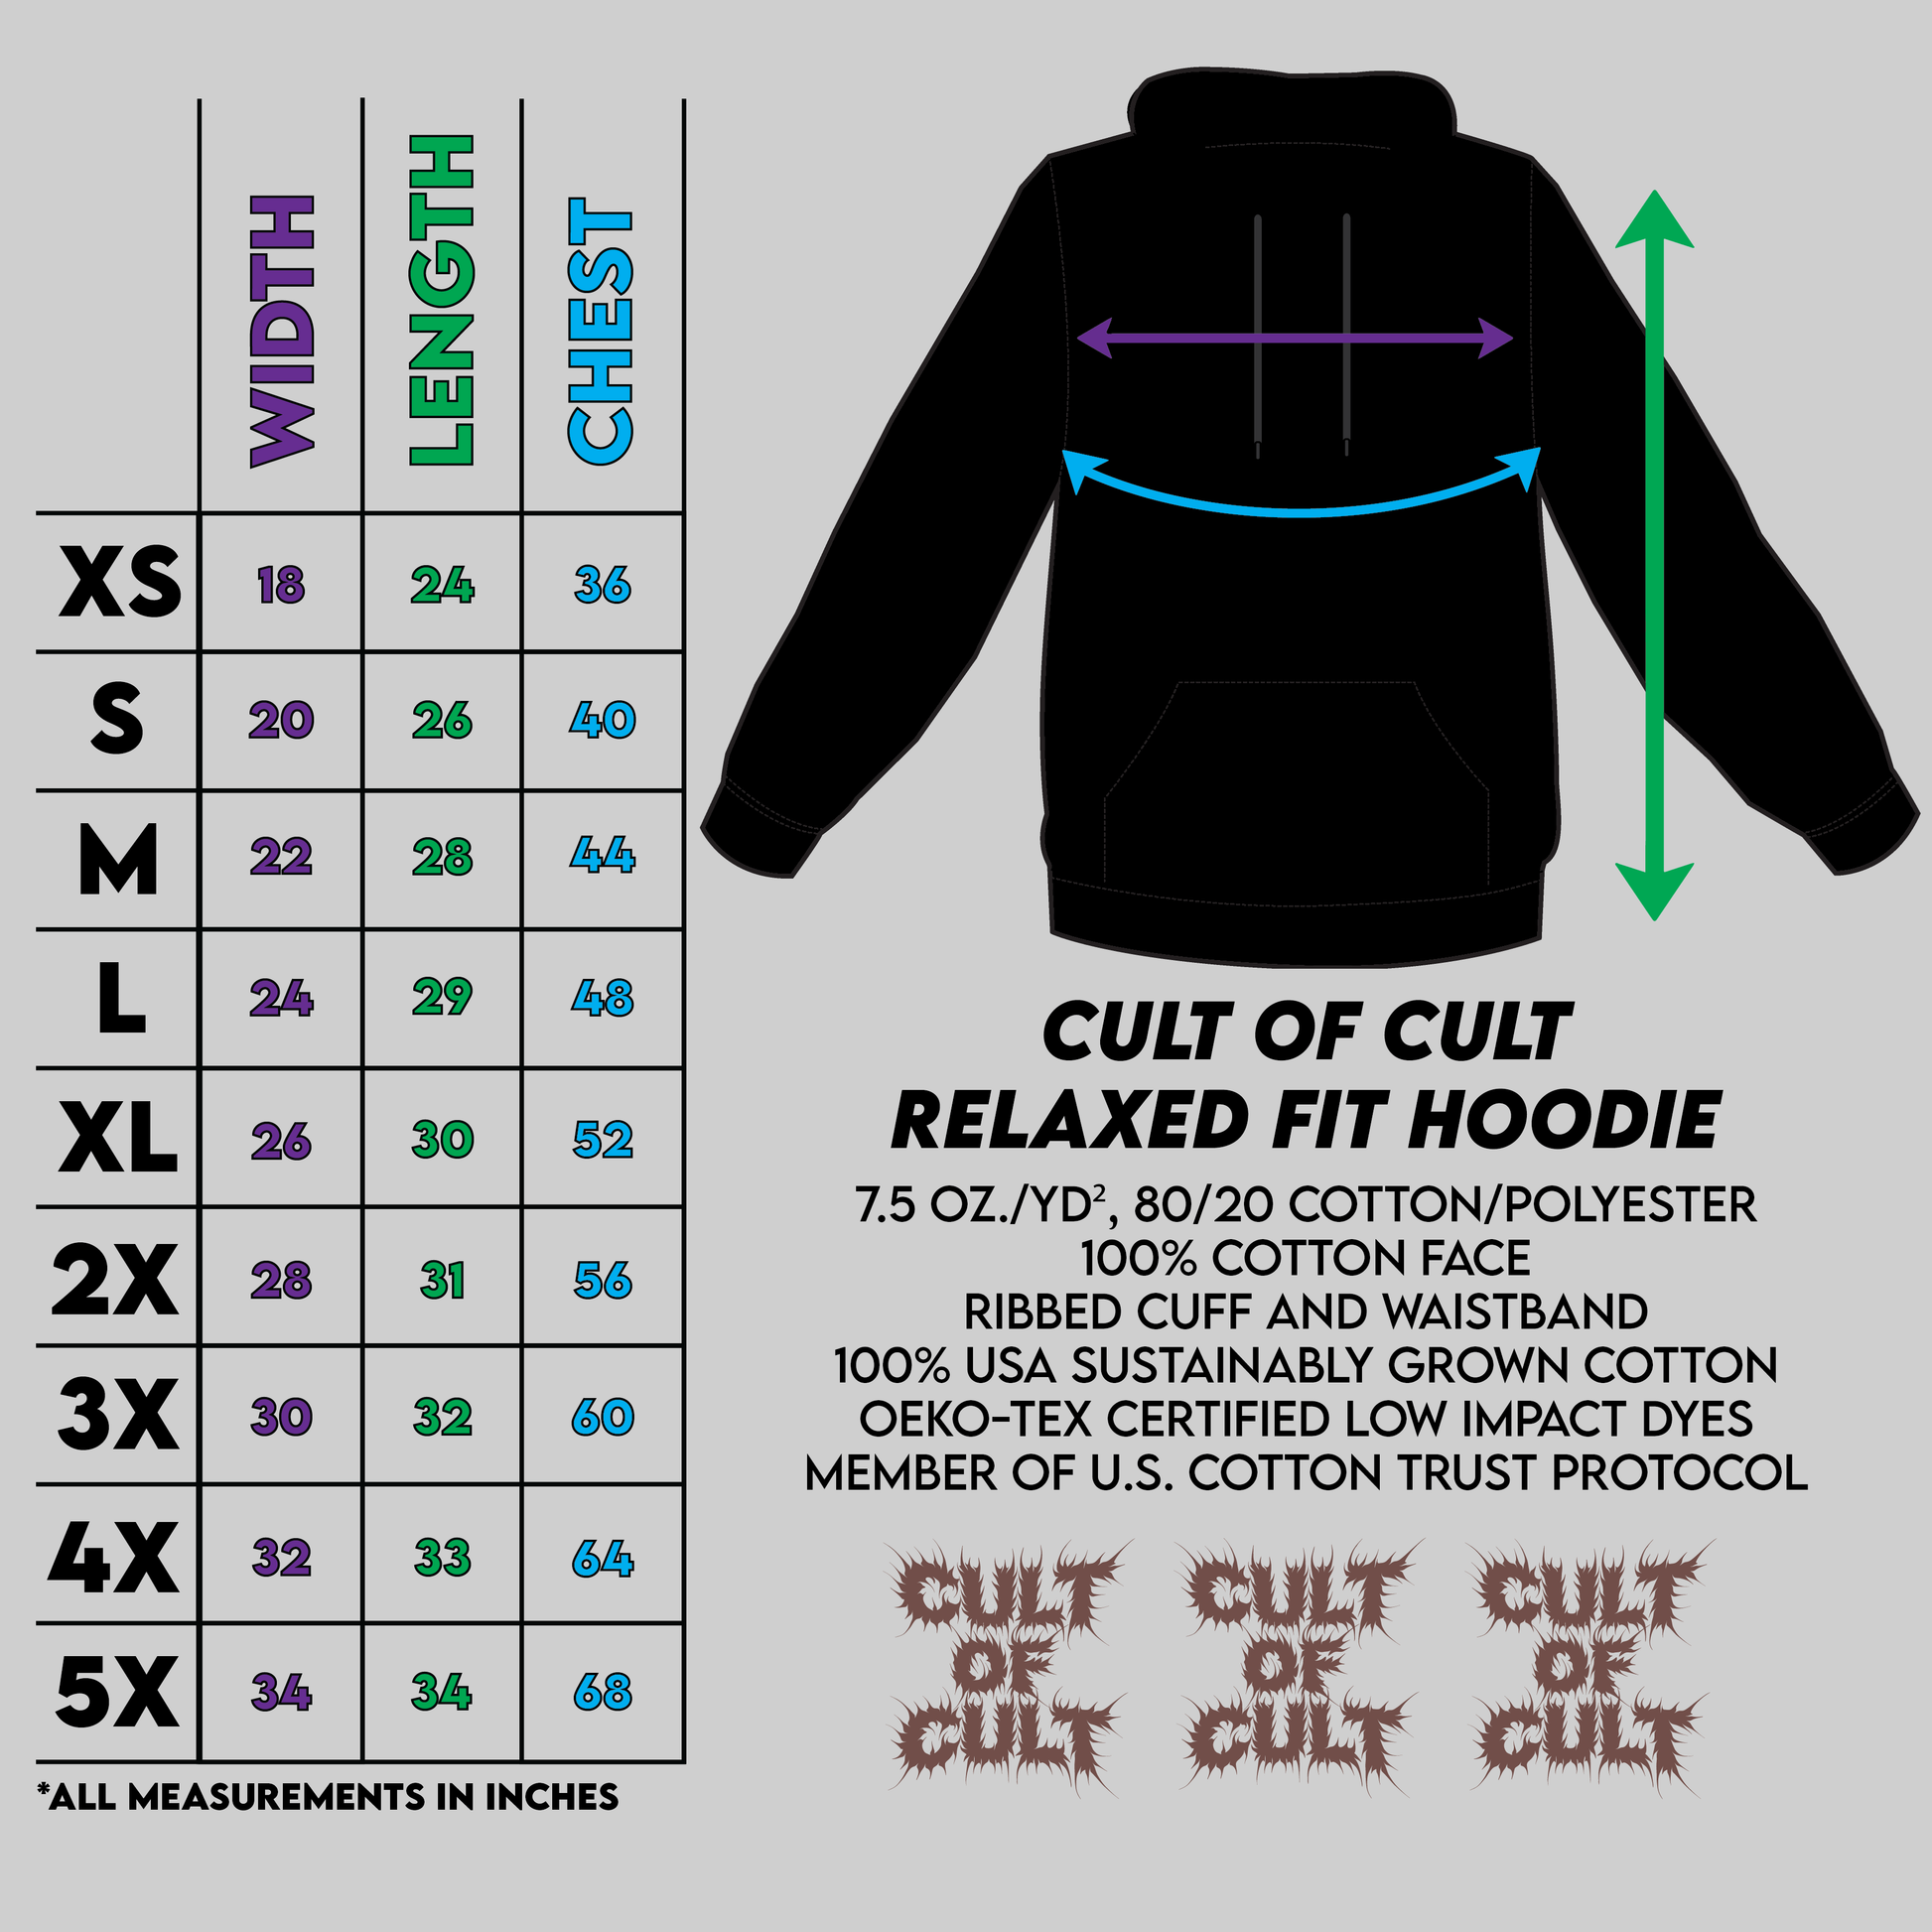 Cult of Cult size chart for hoodies